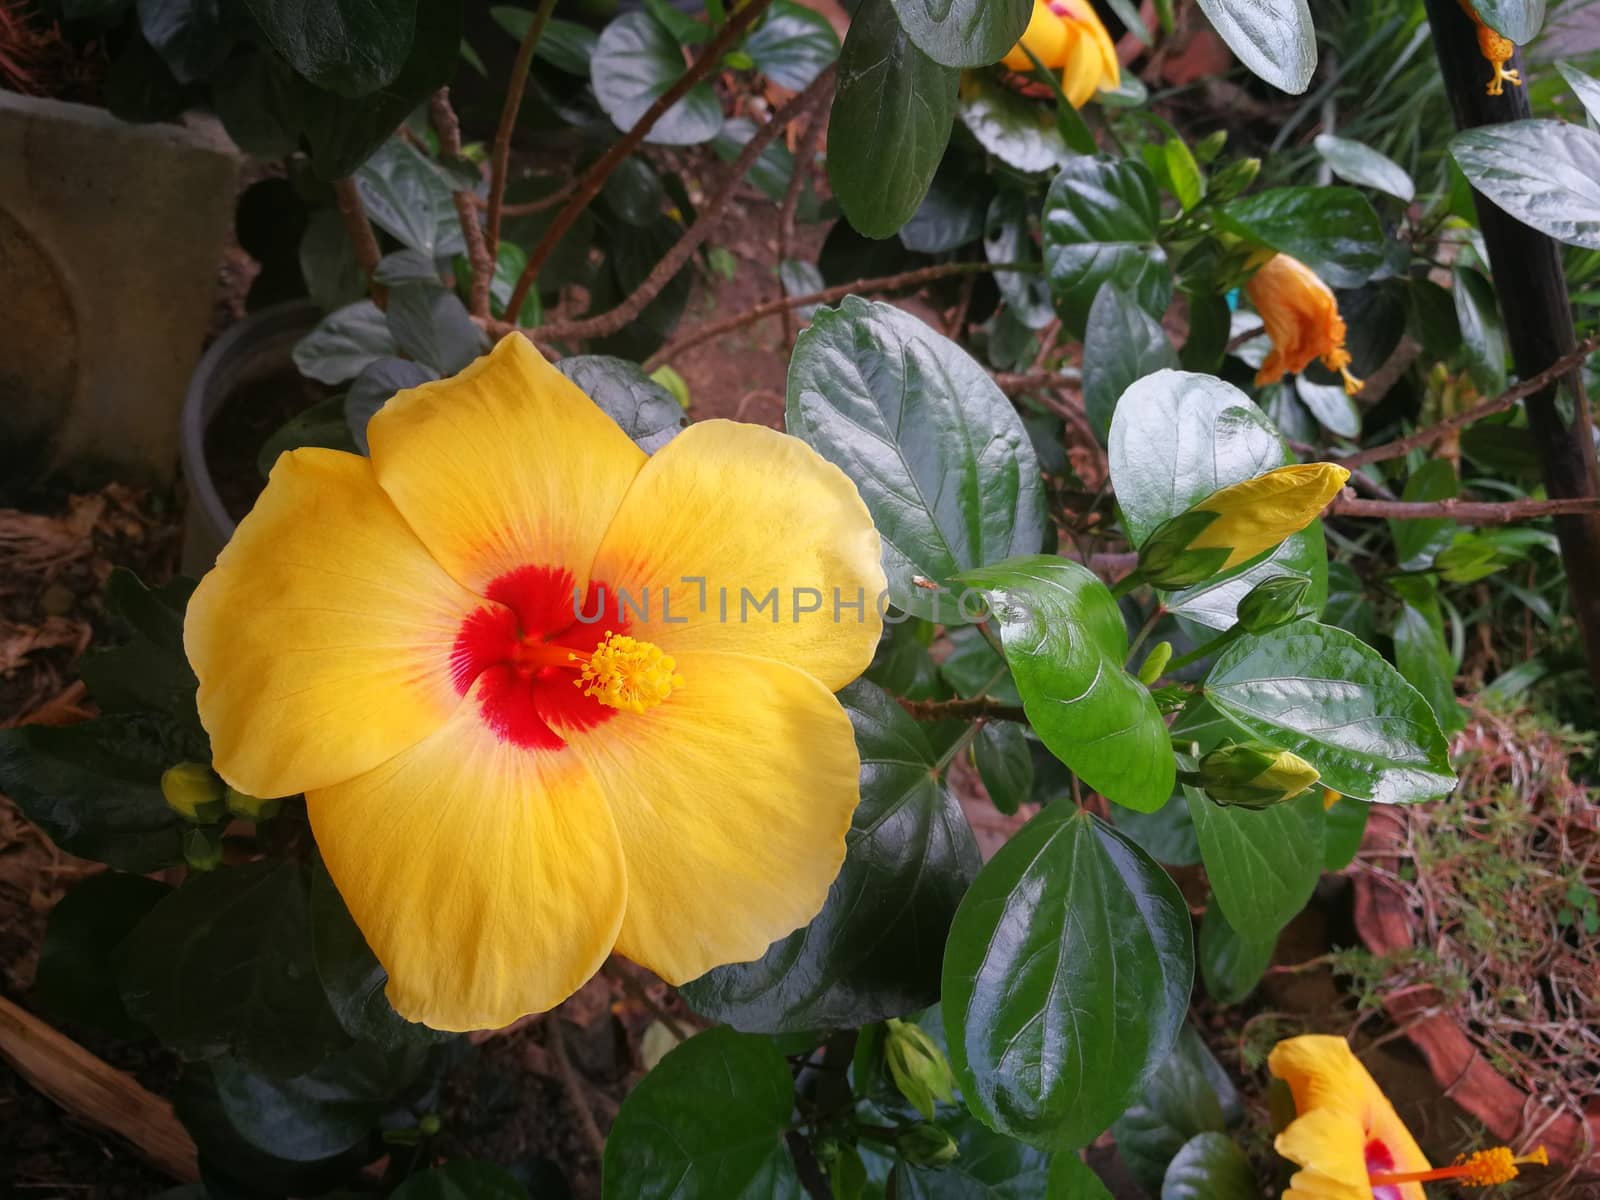 Shoe Flower, Hibiscus, Chinese rose or paper rose